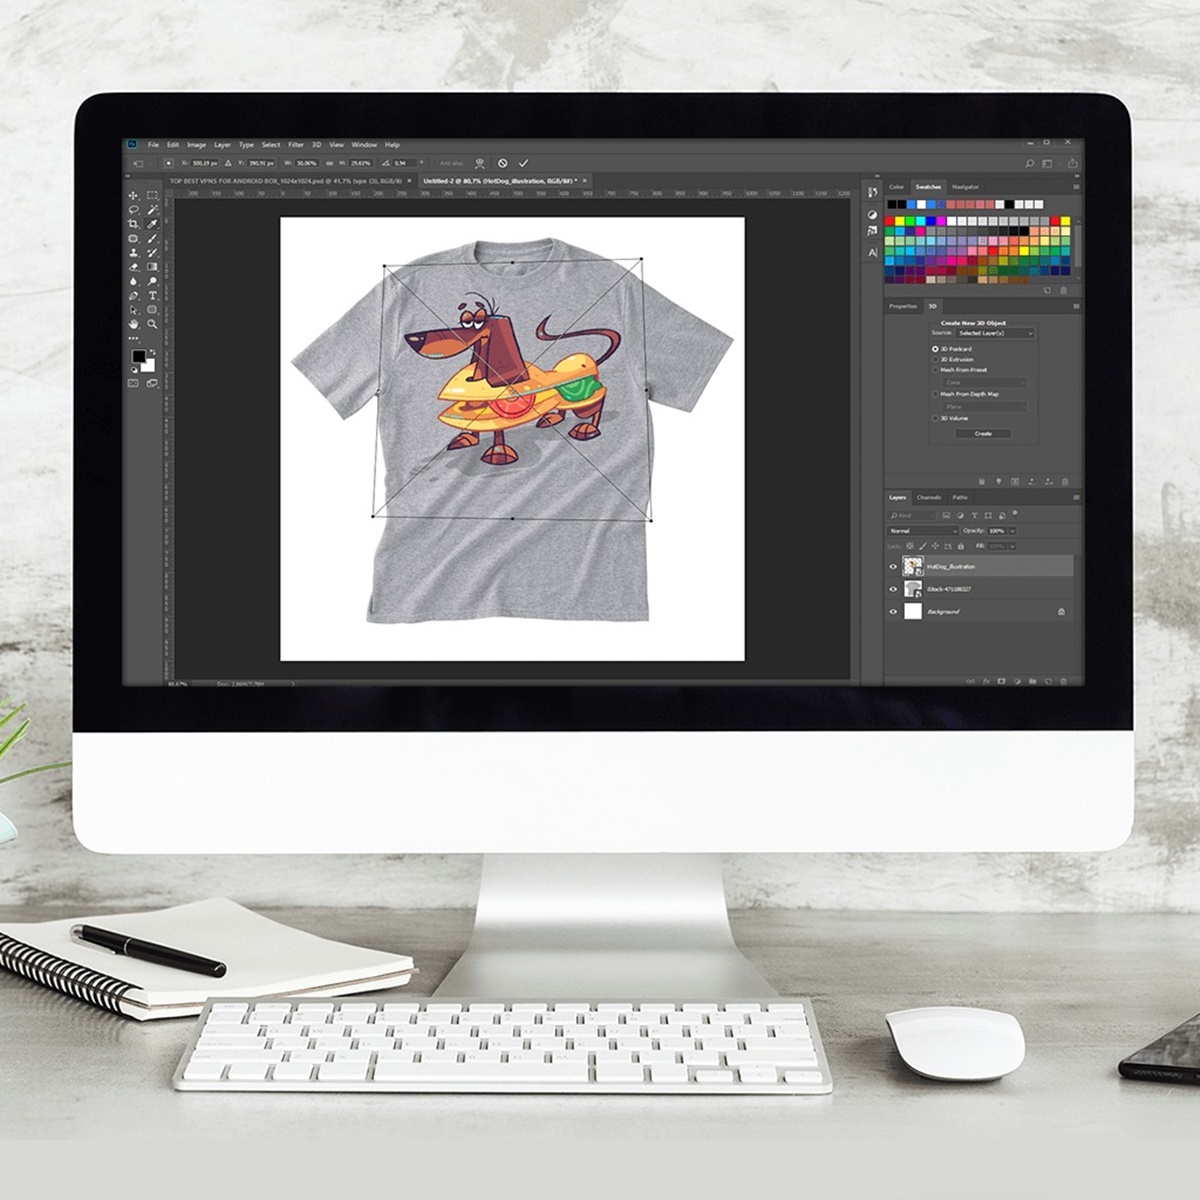 Mac T-Shirt Design Software For Iron-On Transfers